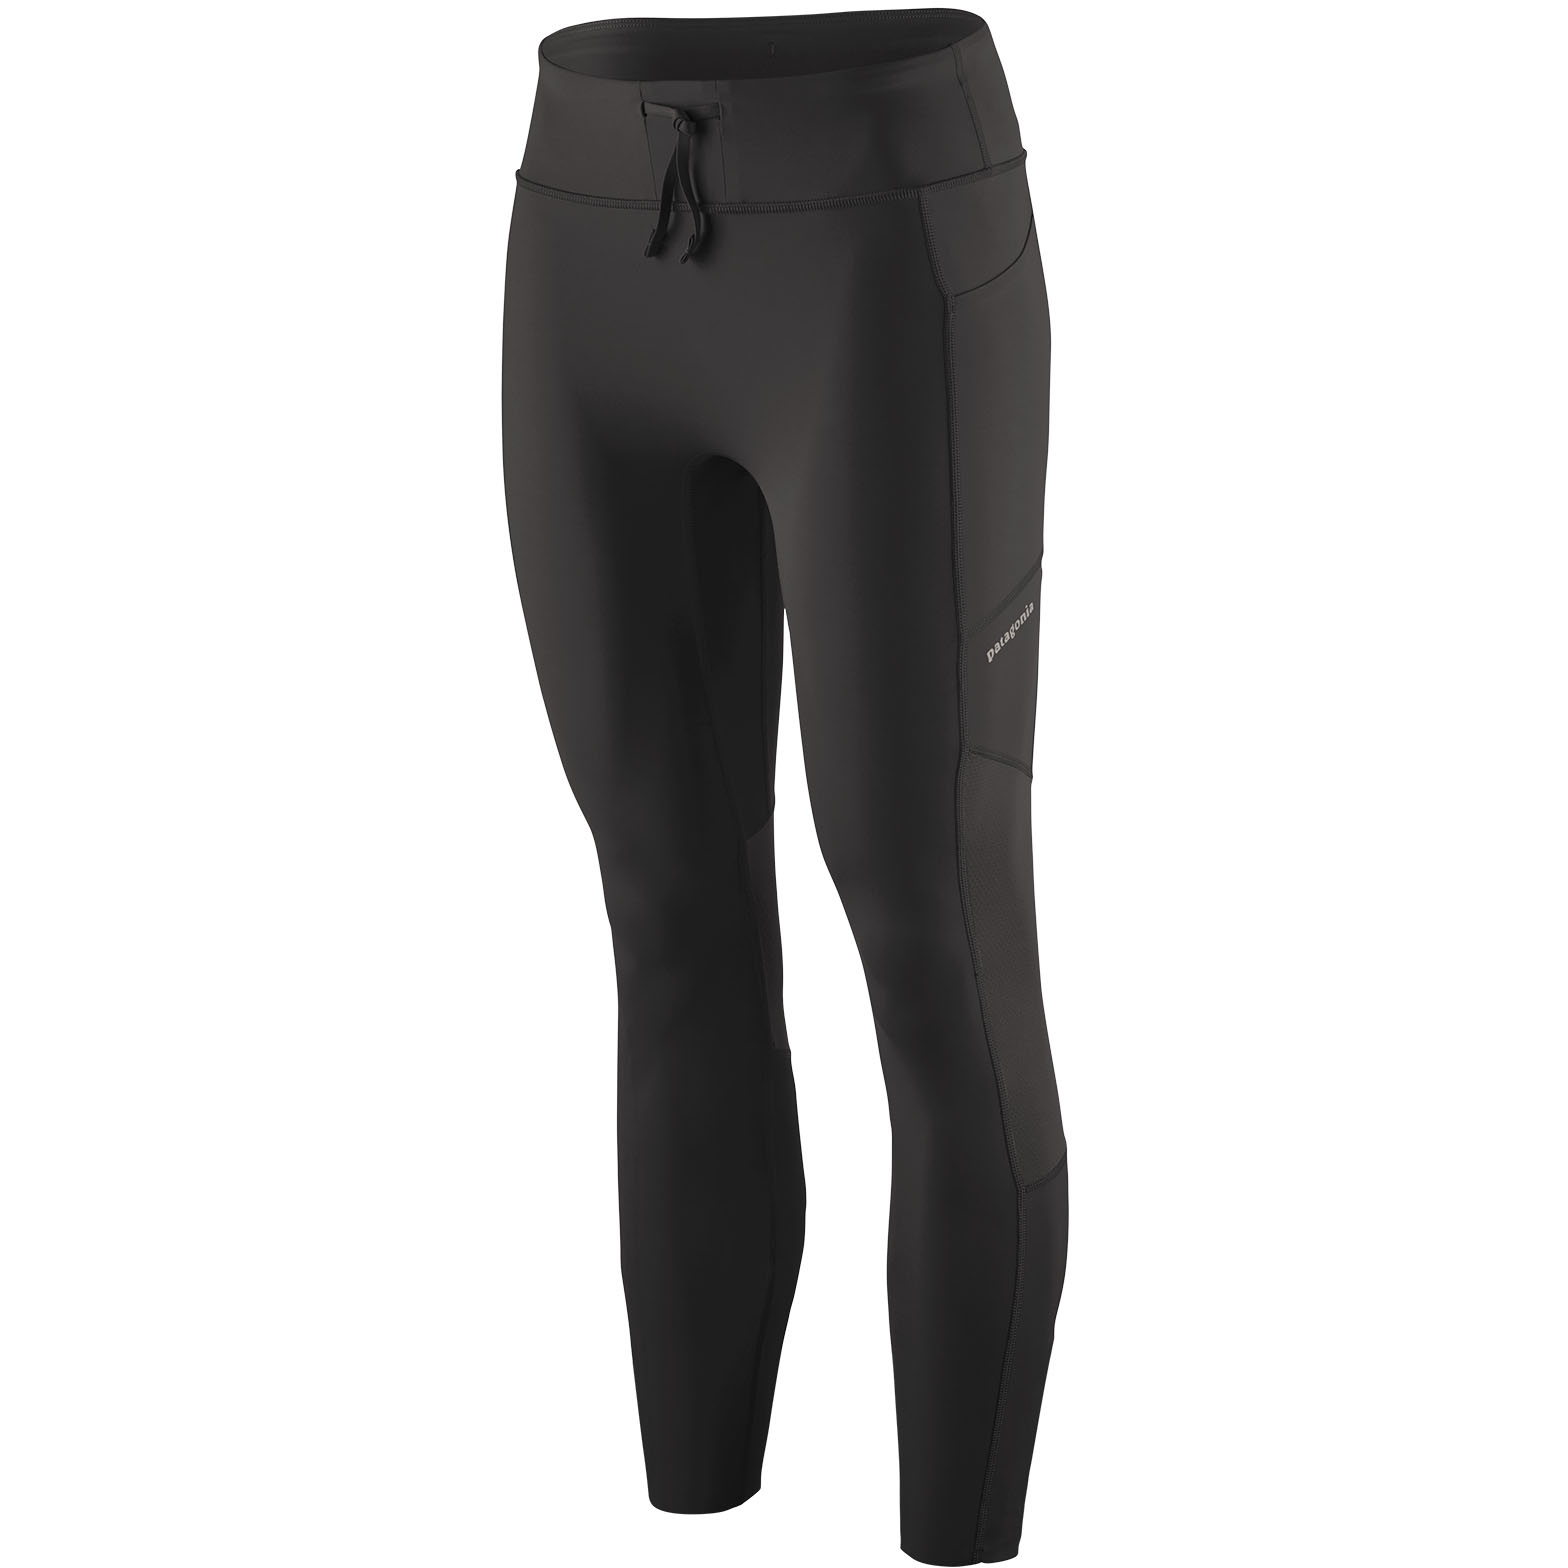 Picture of Patagonia Endless Run 7/8 Tights Women - Black